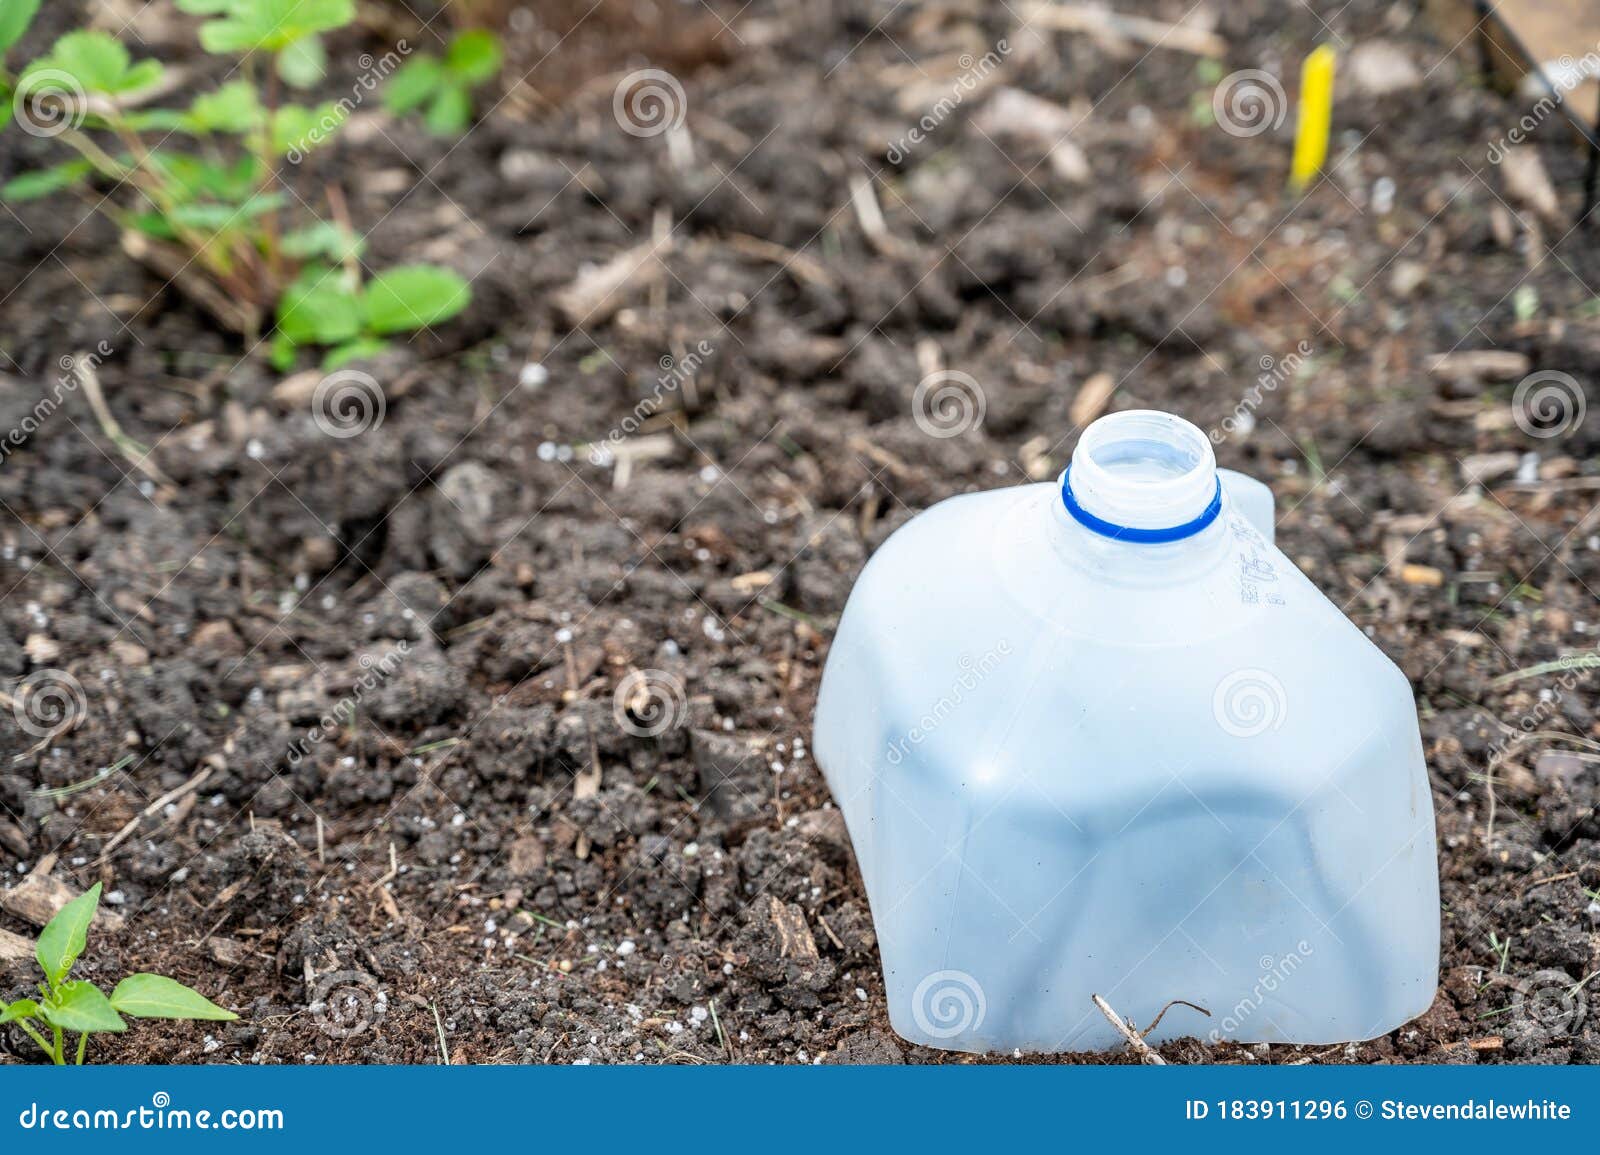 plastic milk jug cut in half to cover garden plants to protect from pests